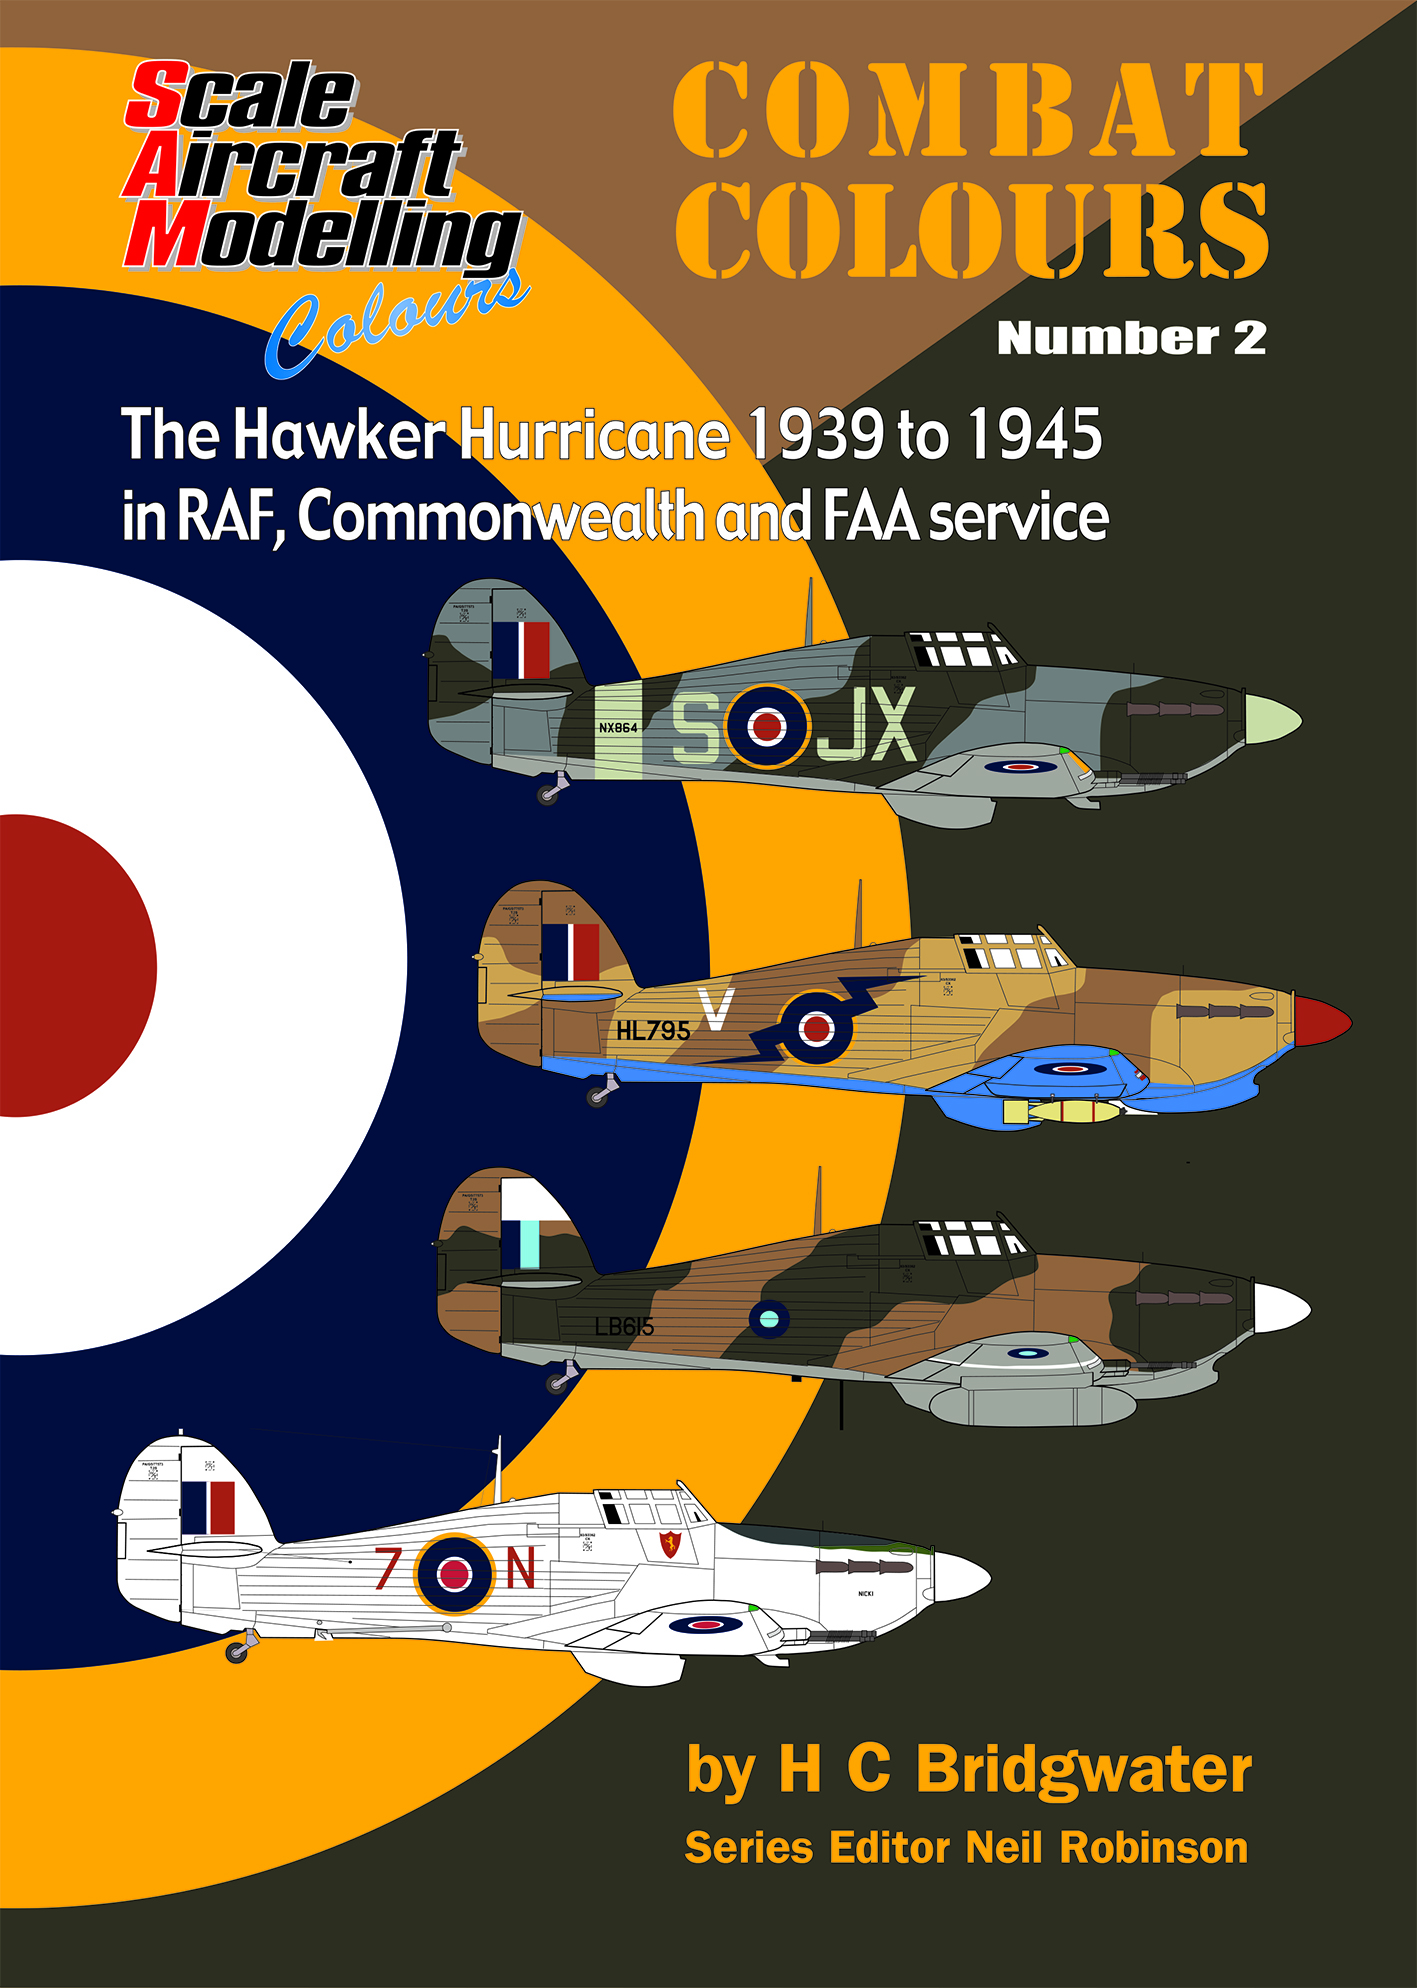 Guideline Publications Ltd Combat Colours no 2 The Hawker Hurricane 1939 to 1945 in RAF The Hawker Hurricane 1939 -1945 in RAF. Commonwealth and FAA service 